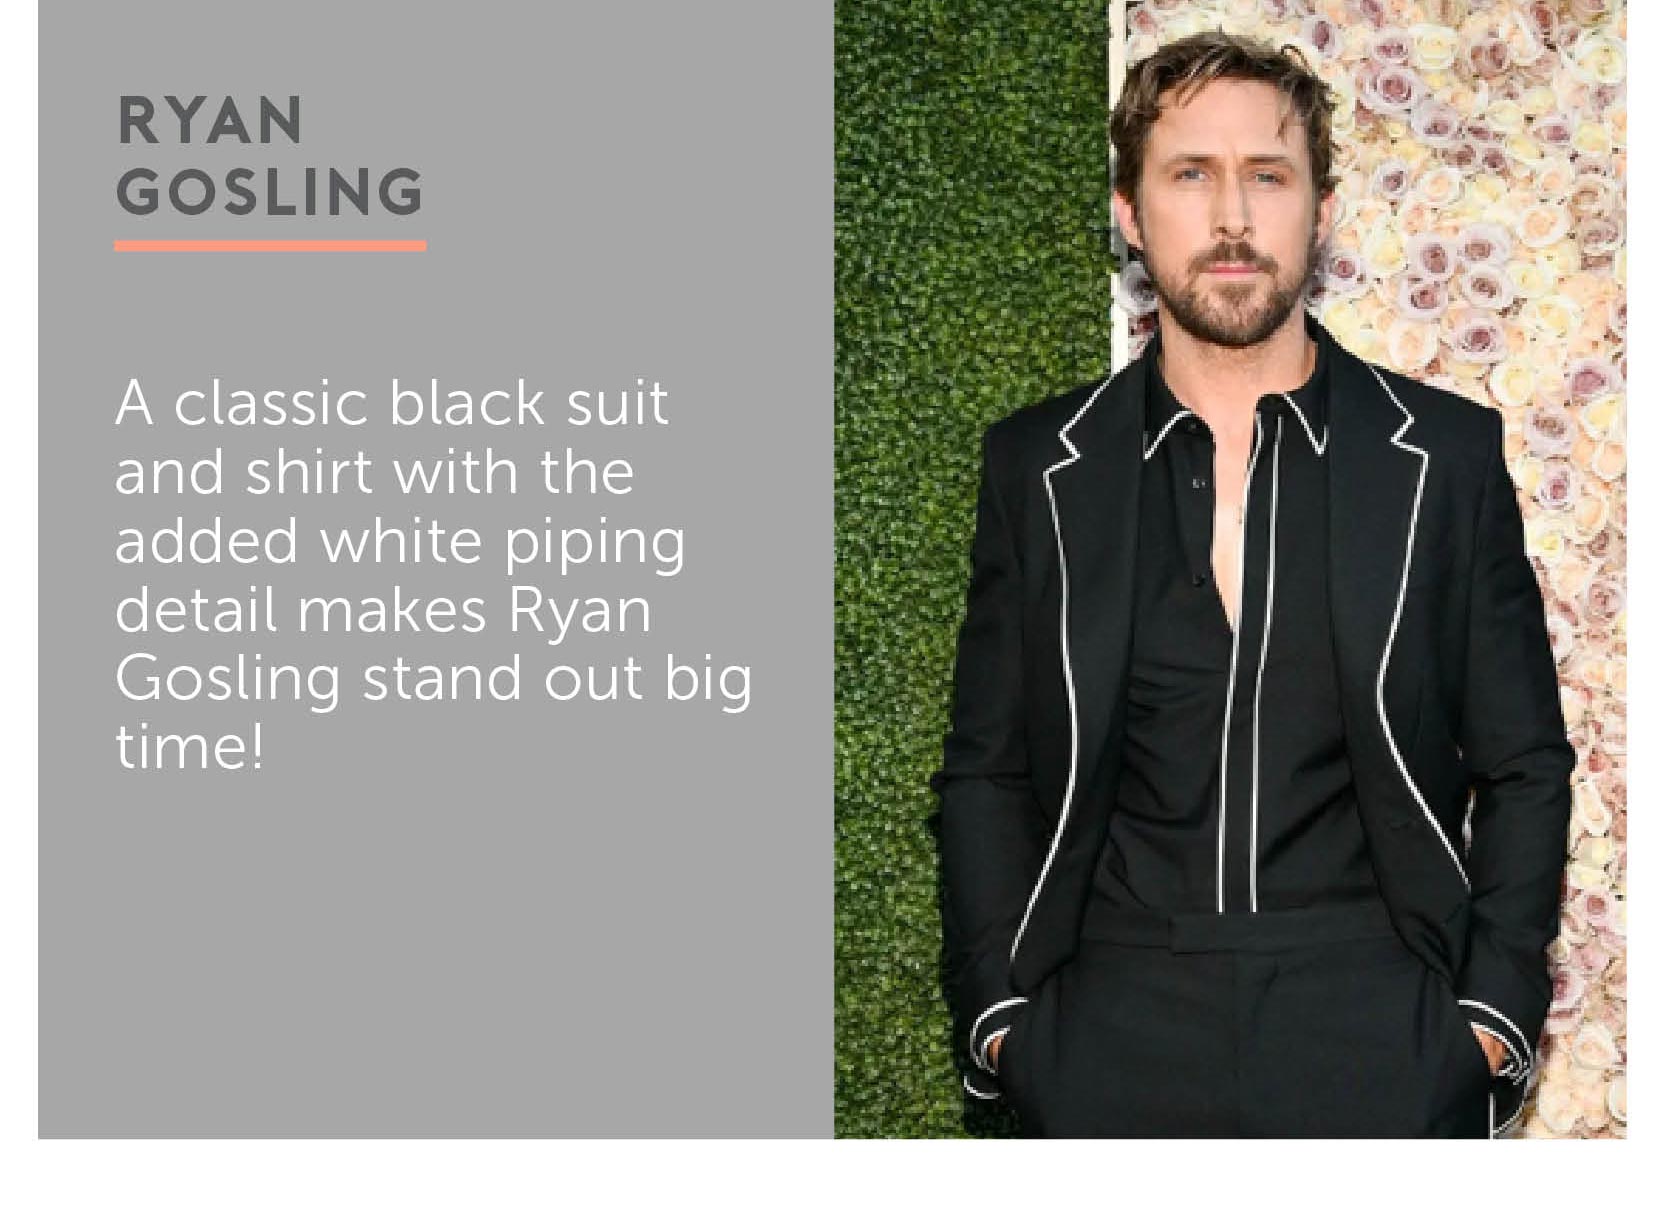 A classic black suit and shirt with the added white piping detail makes Ryan Gosling stand out big time!